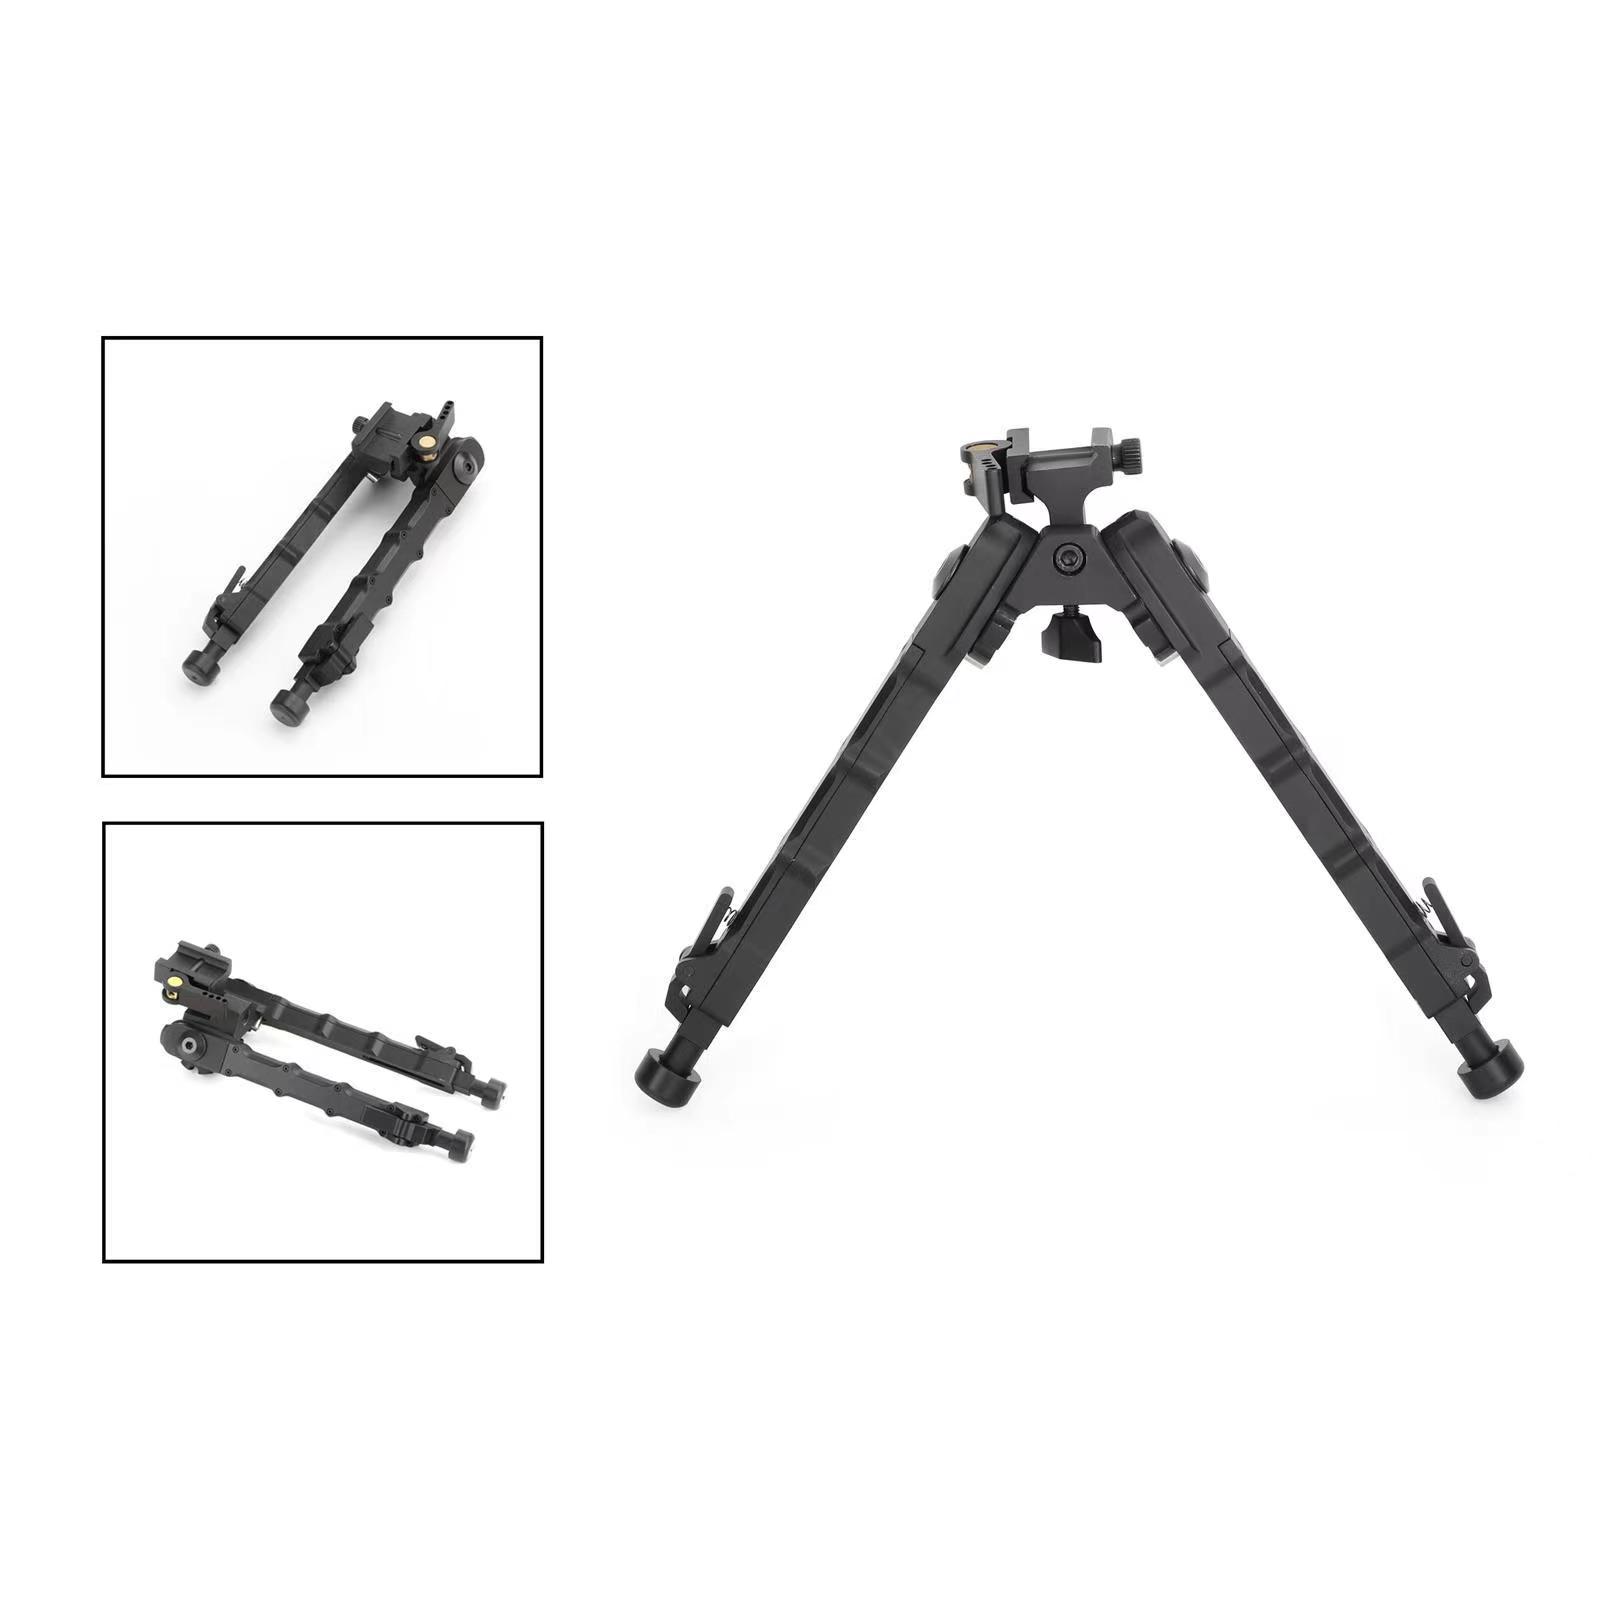  Tiltable Foldable Quick Release Bipod with S-Lock, Swivel Sling Mount And Picatinny/Weaver Rail Adapter, 7-9 Inches